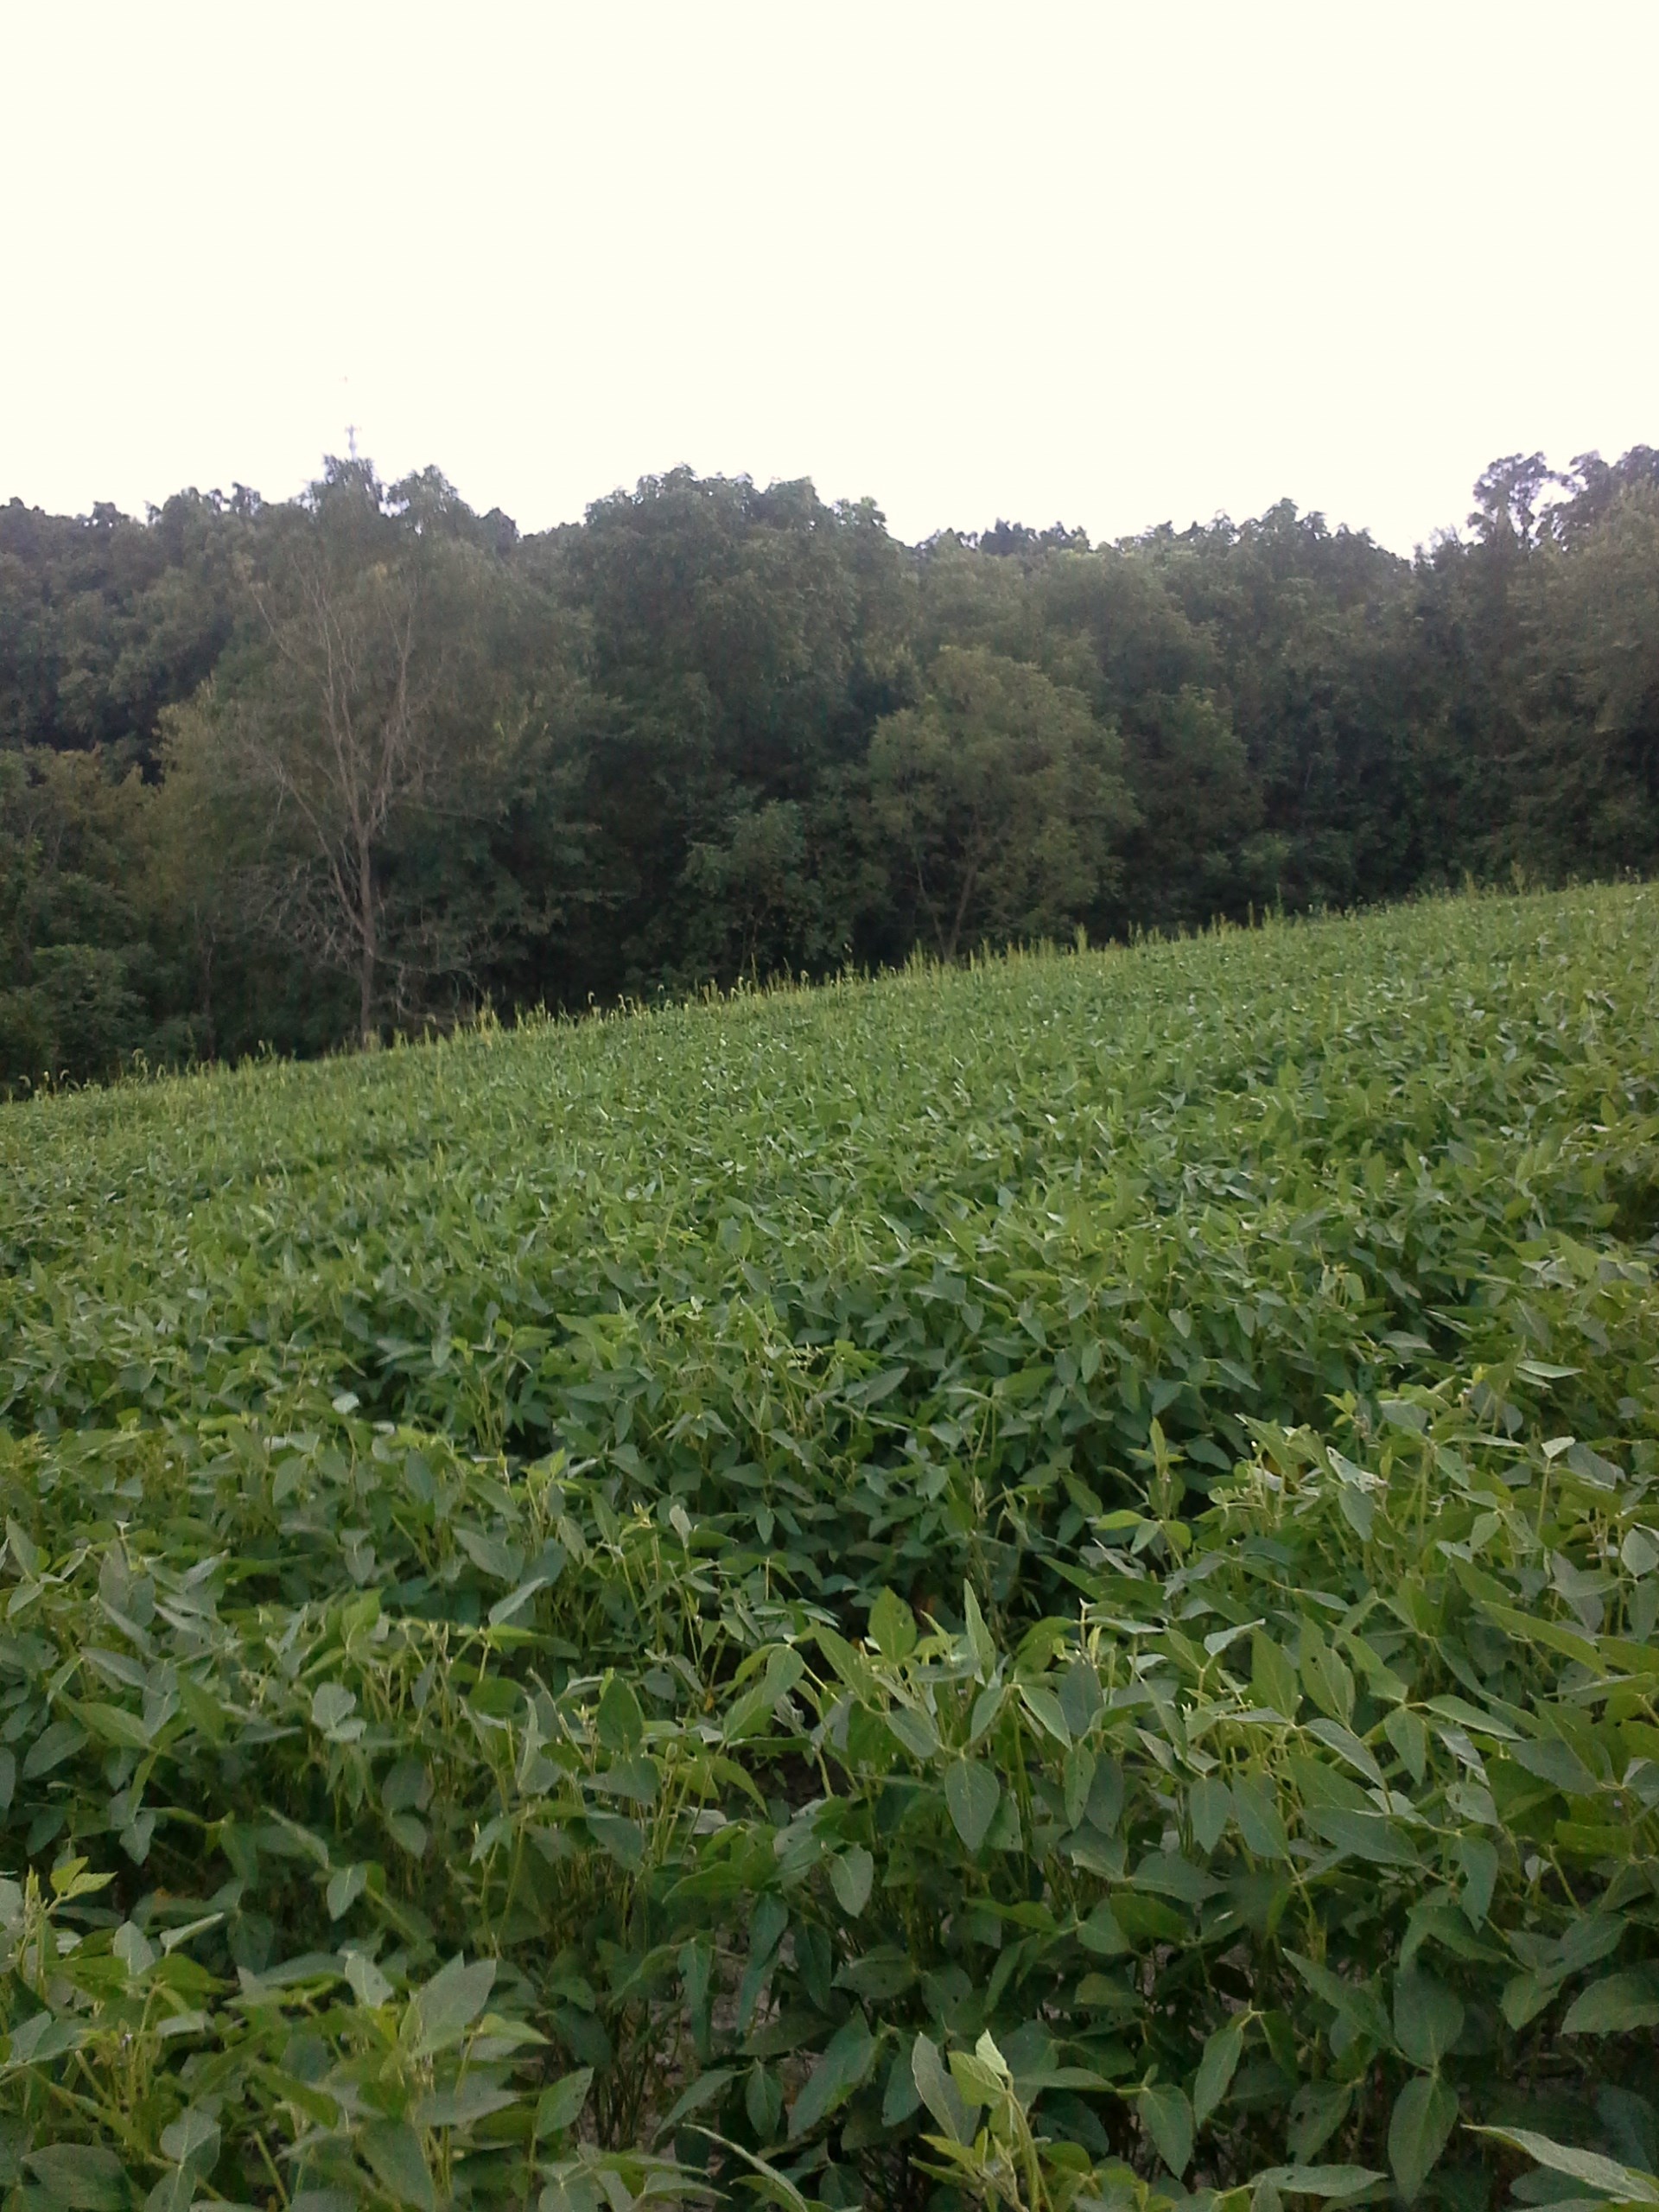 The soybean plots are looking great again this year and the deer are pounding them.